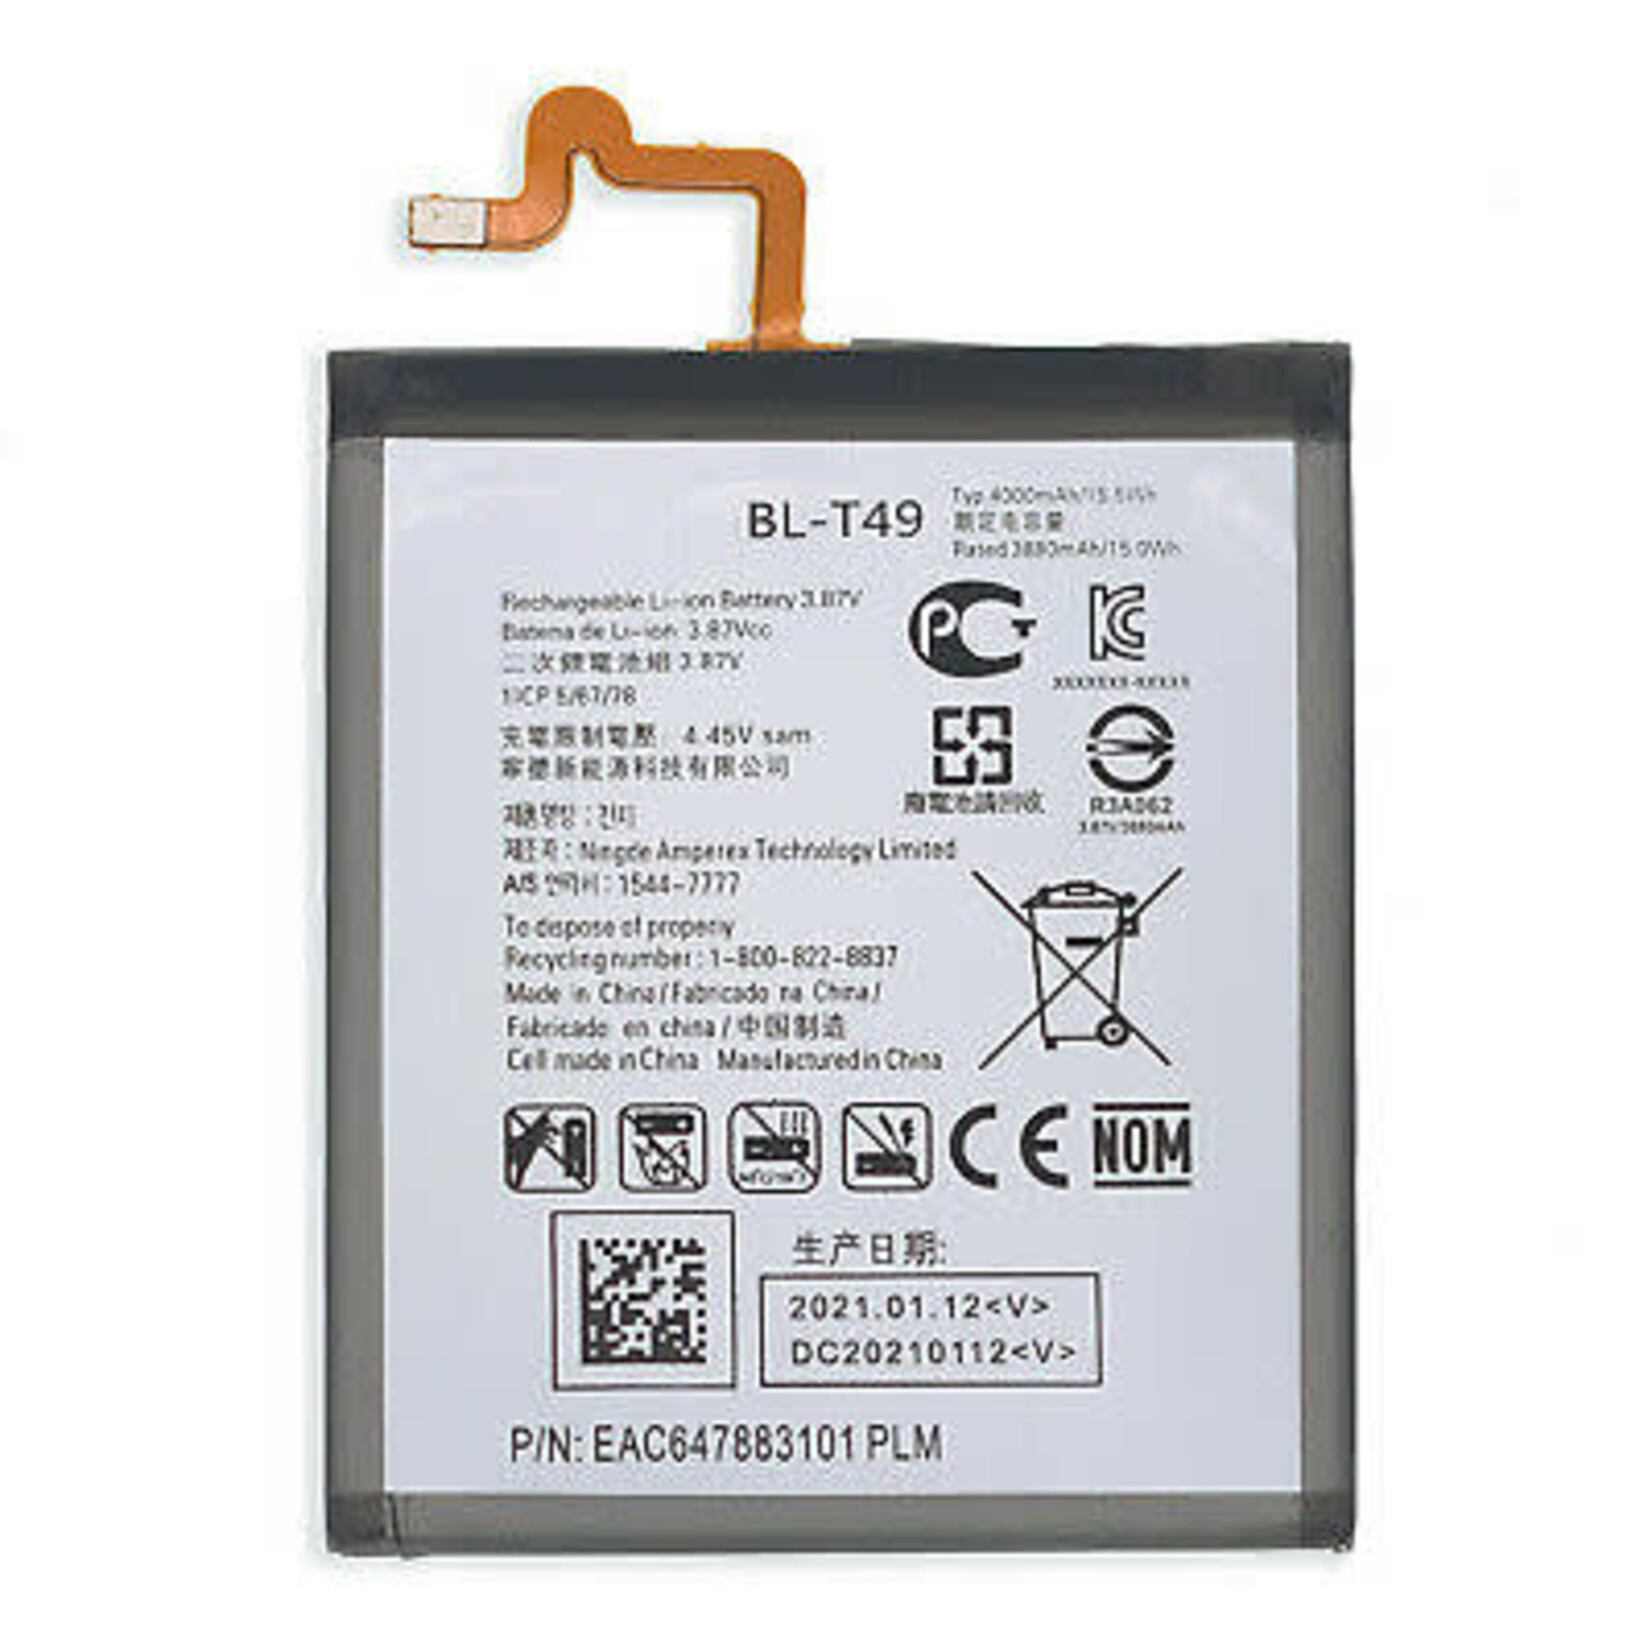 LG Replacement battery for LG K61 / K41S (LG-DH40) BL-T49